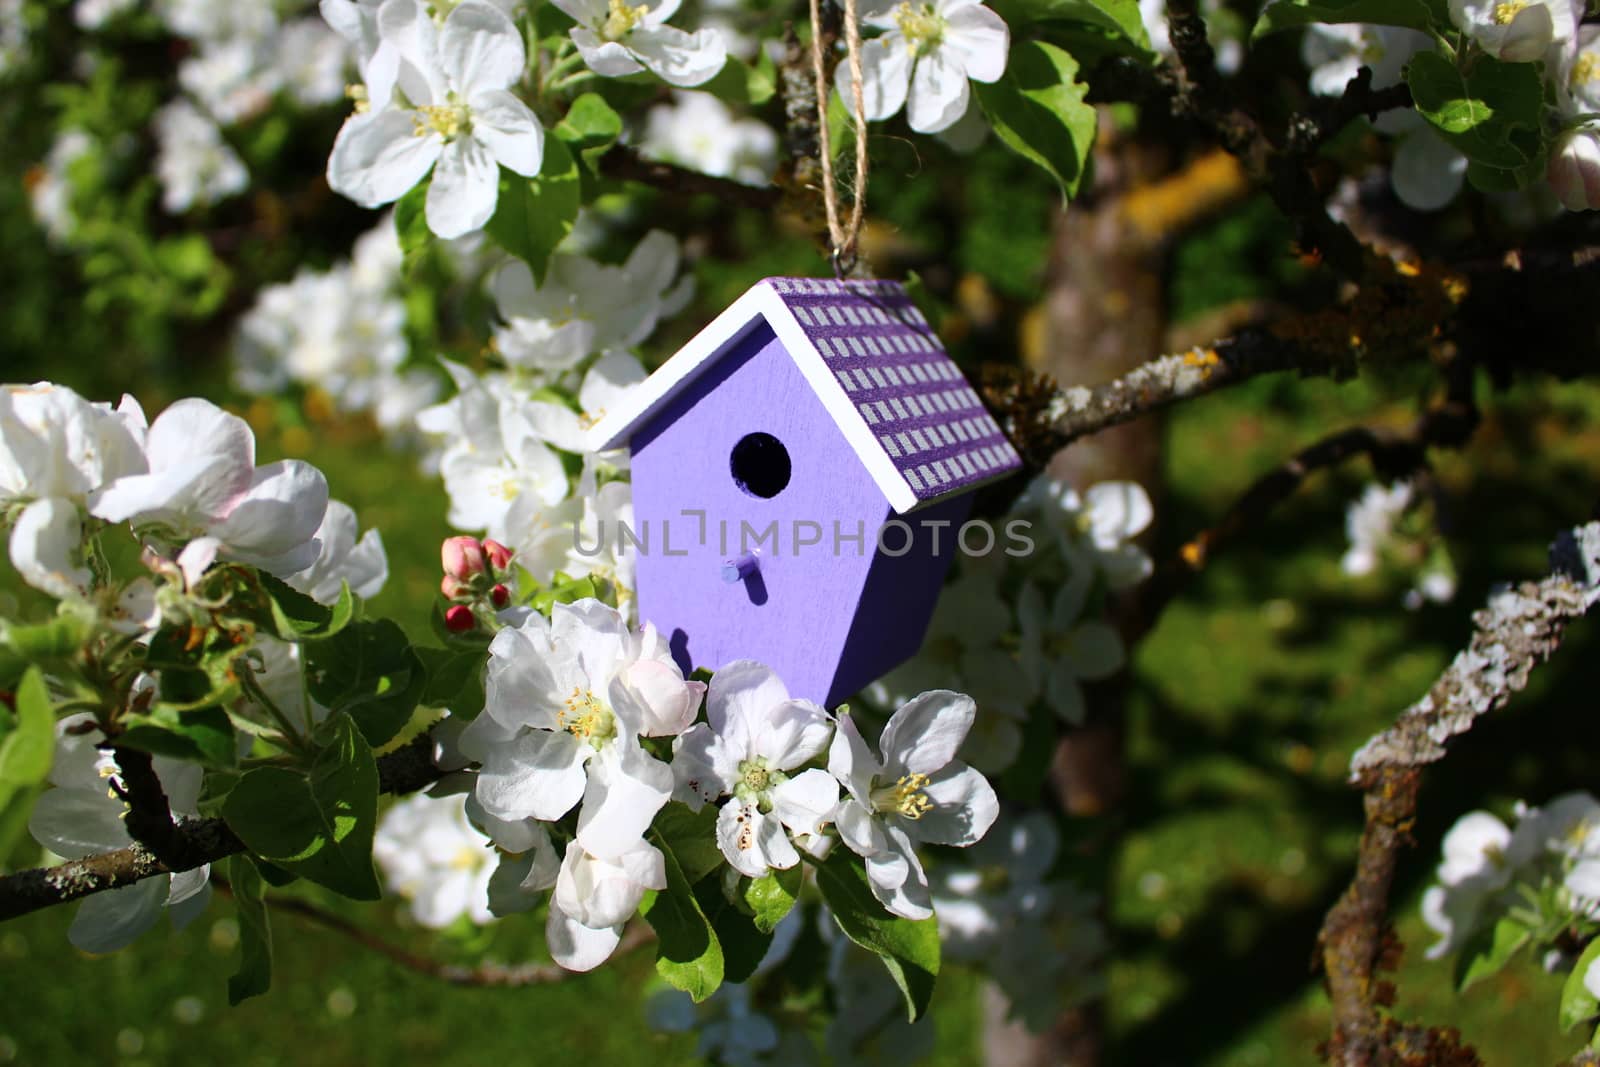 The picture shows a birdhouse in a blossoming pear tree.